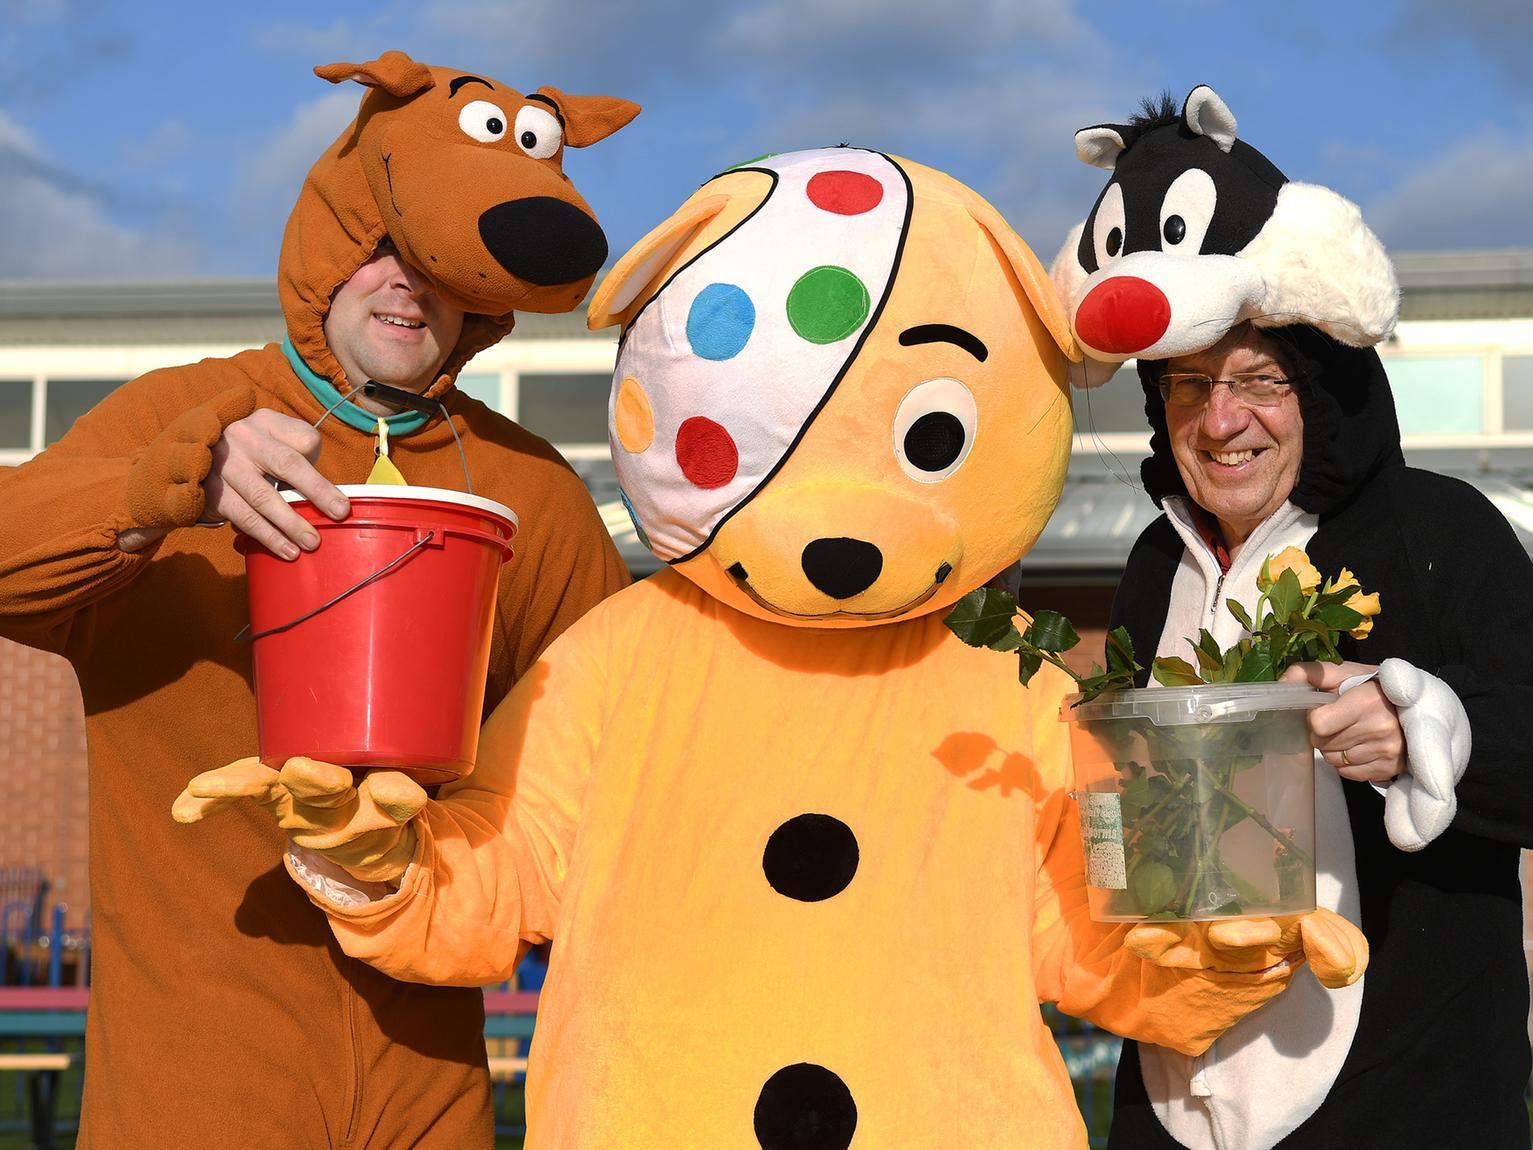 Bridlington Round Table doing there bit for Children in Need by going to all the primary schools in Bridlington and district dressed as Pudsey Bear and well known cartoon characters. PA1946-7a